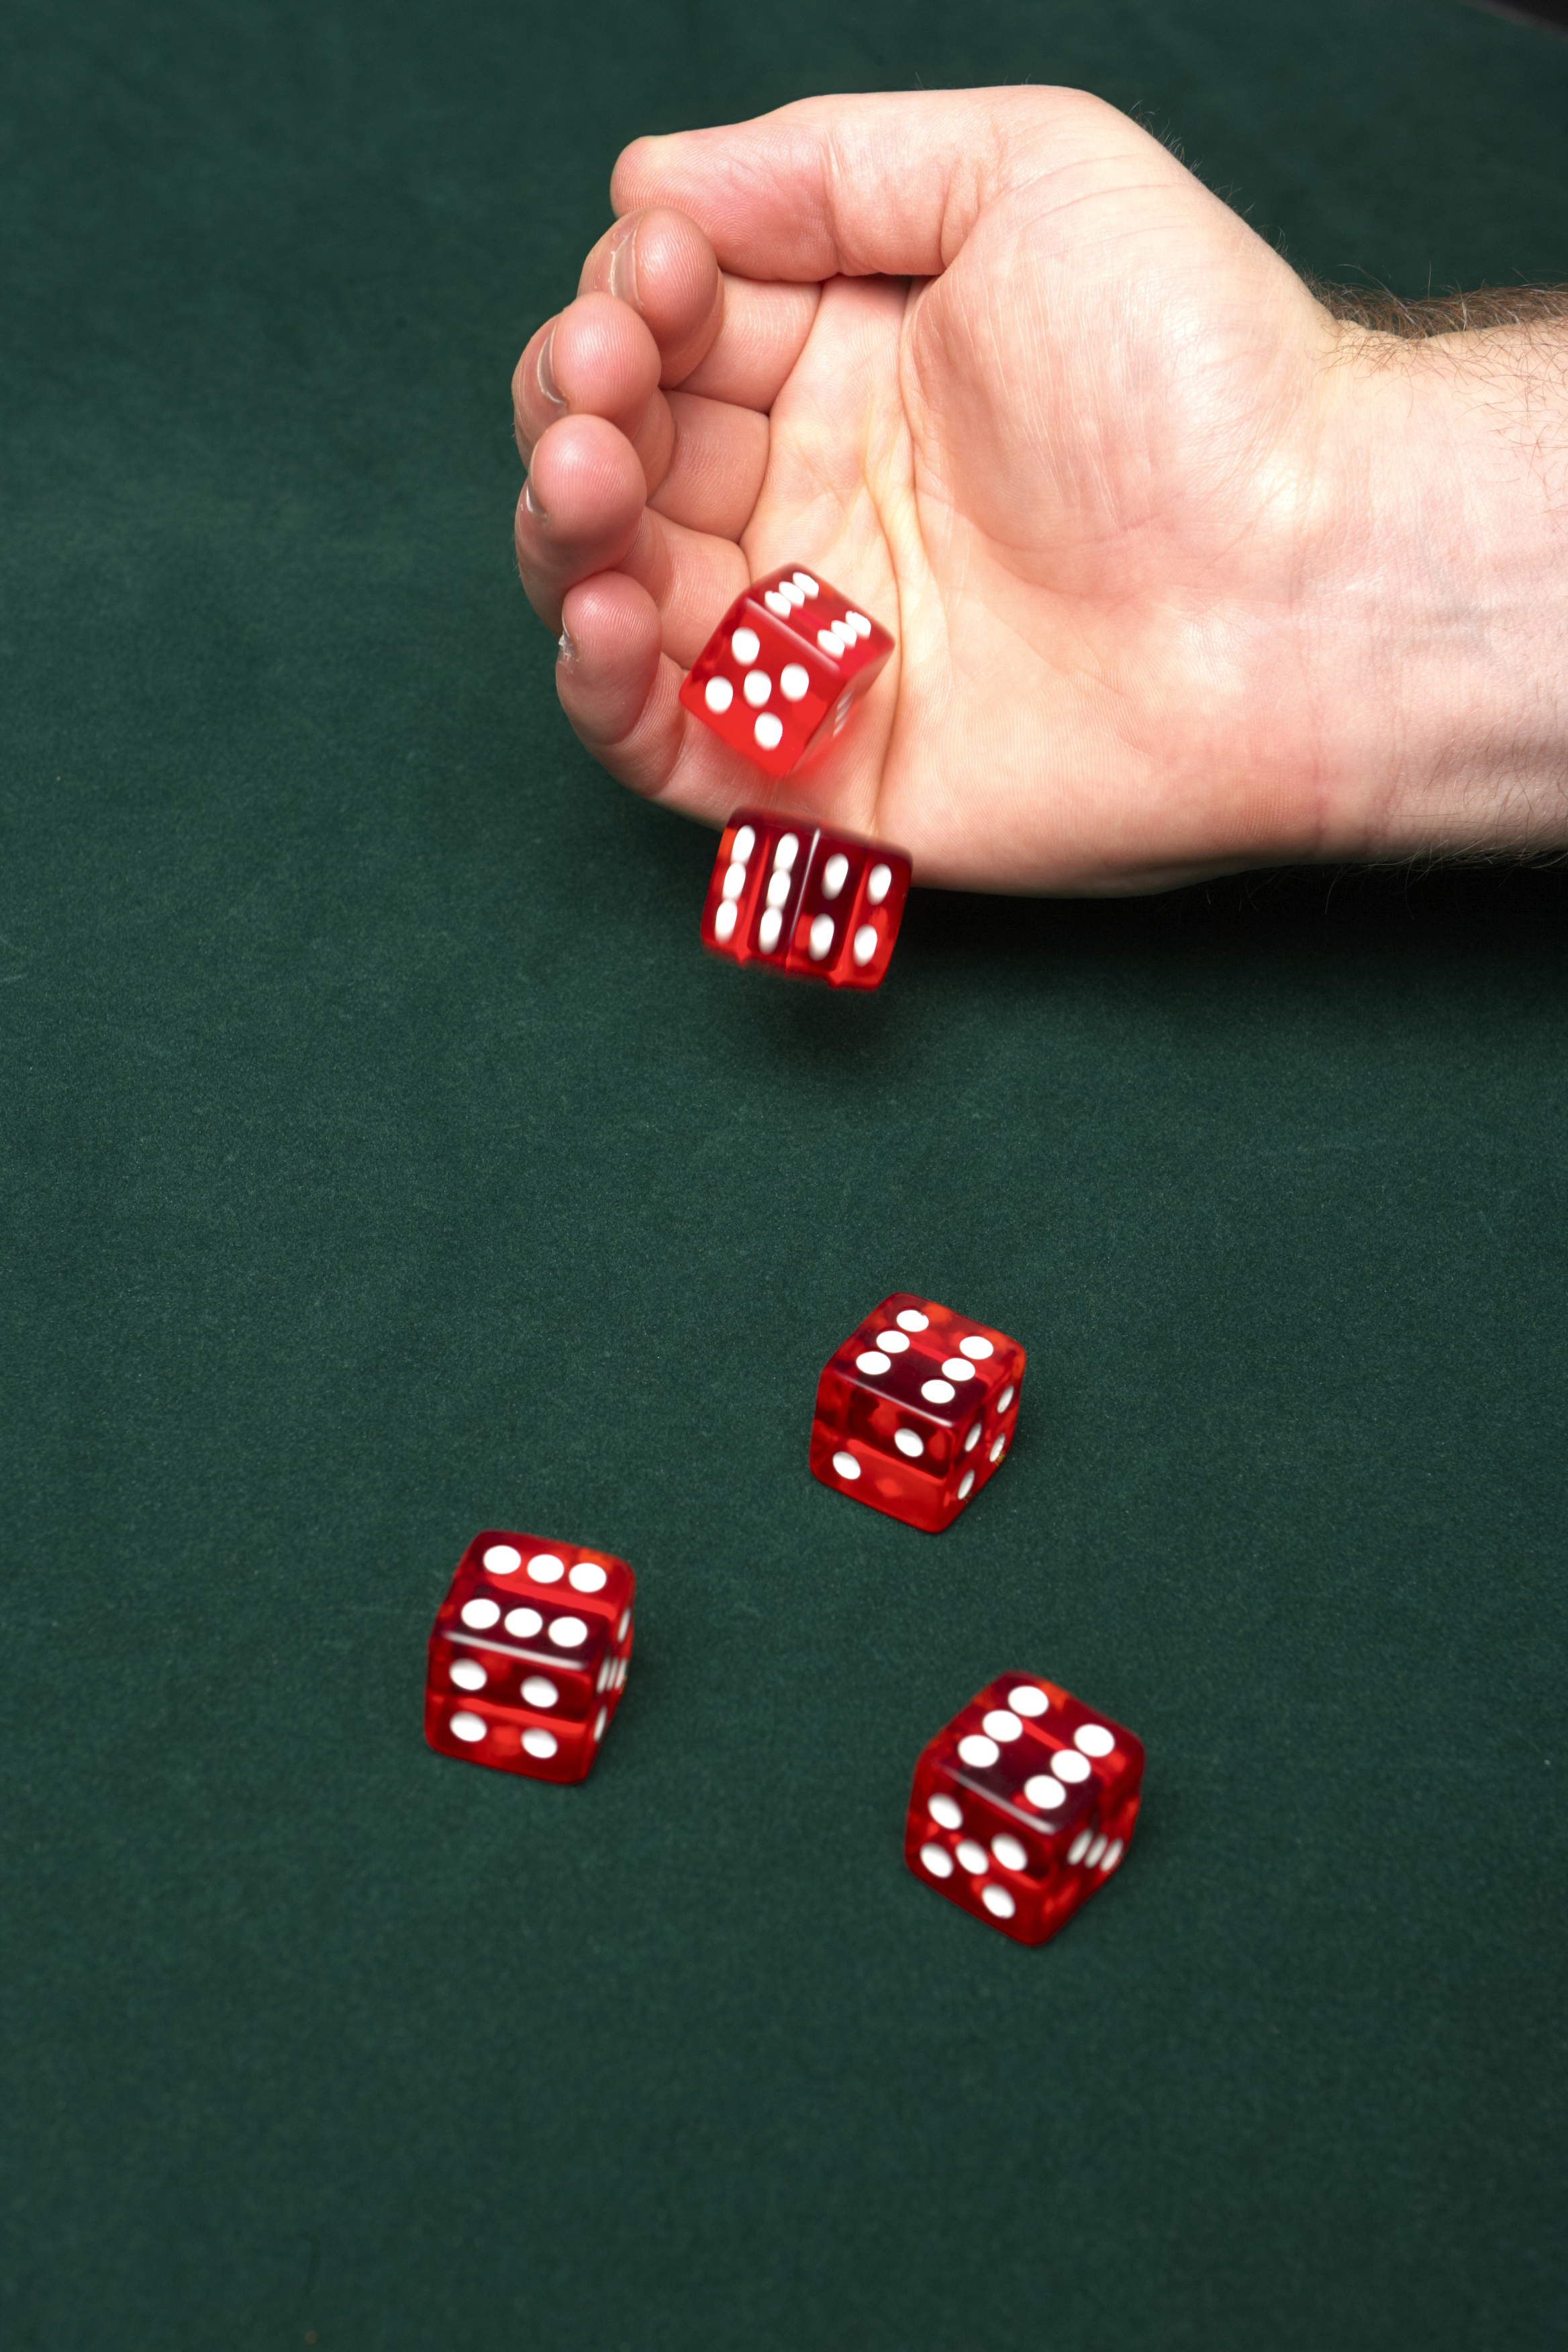 Man rolling 5 red dice